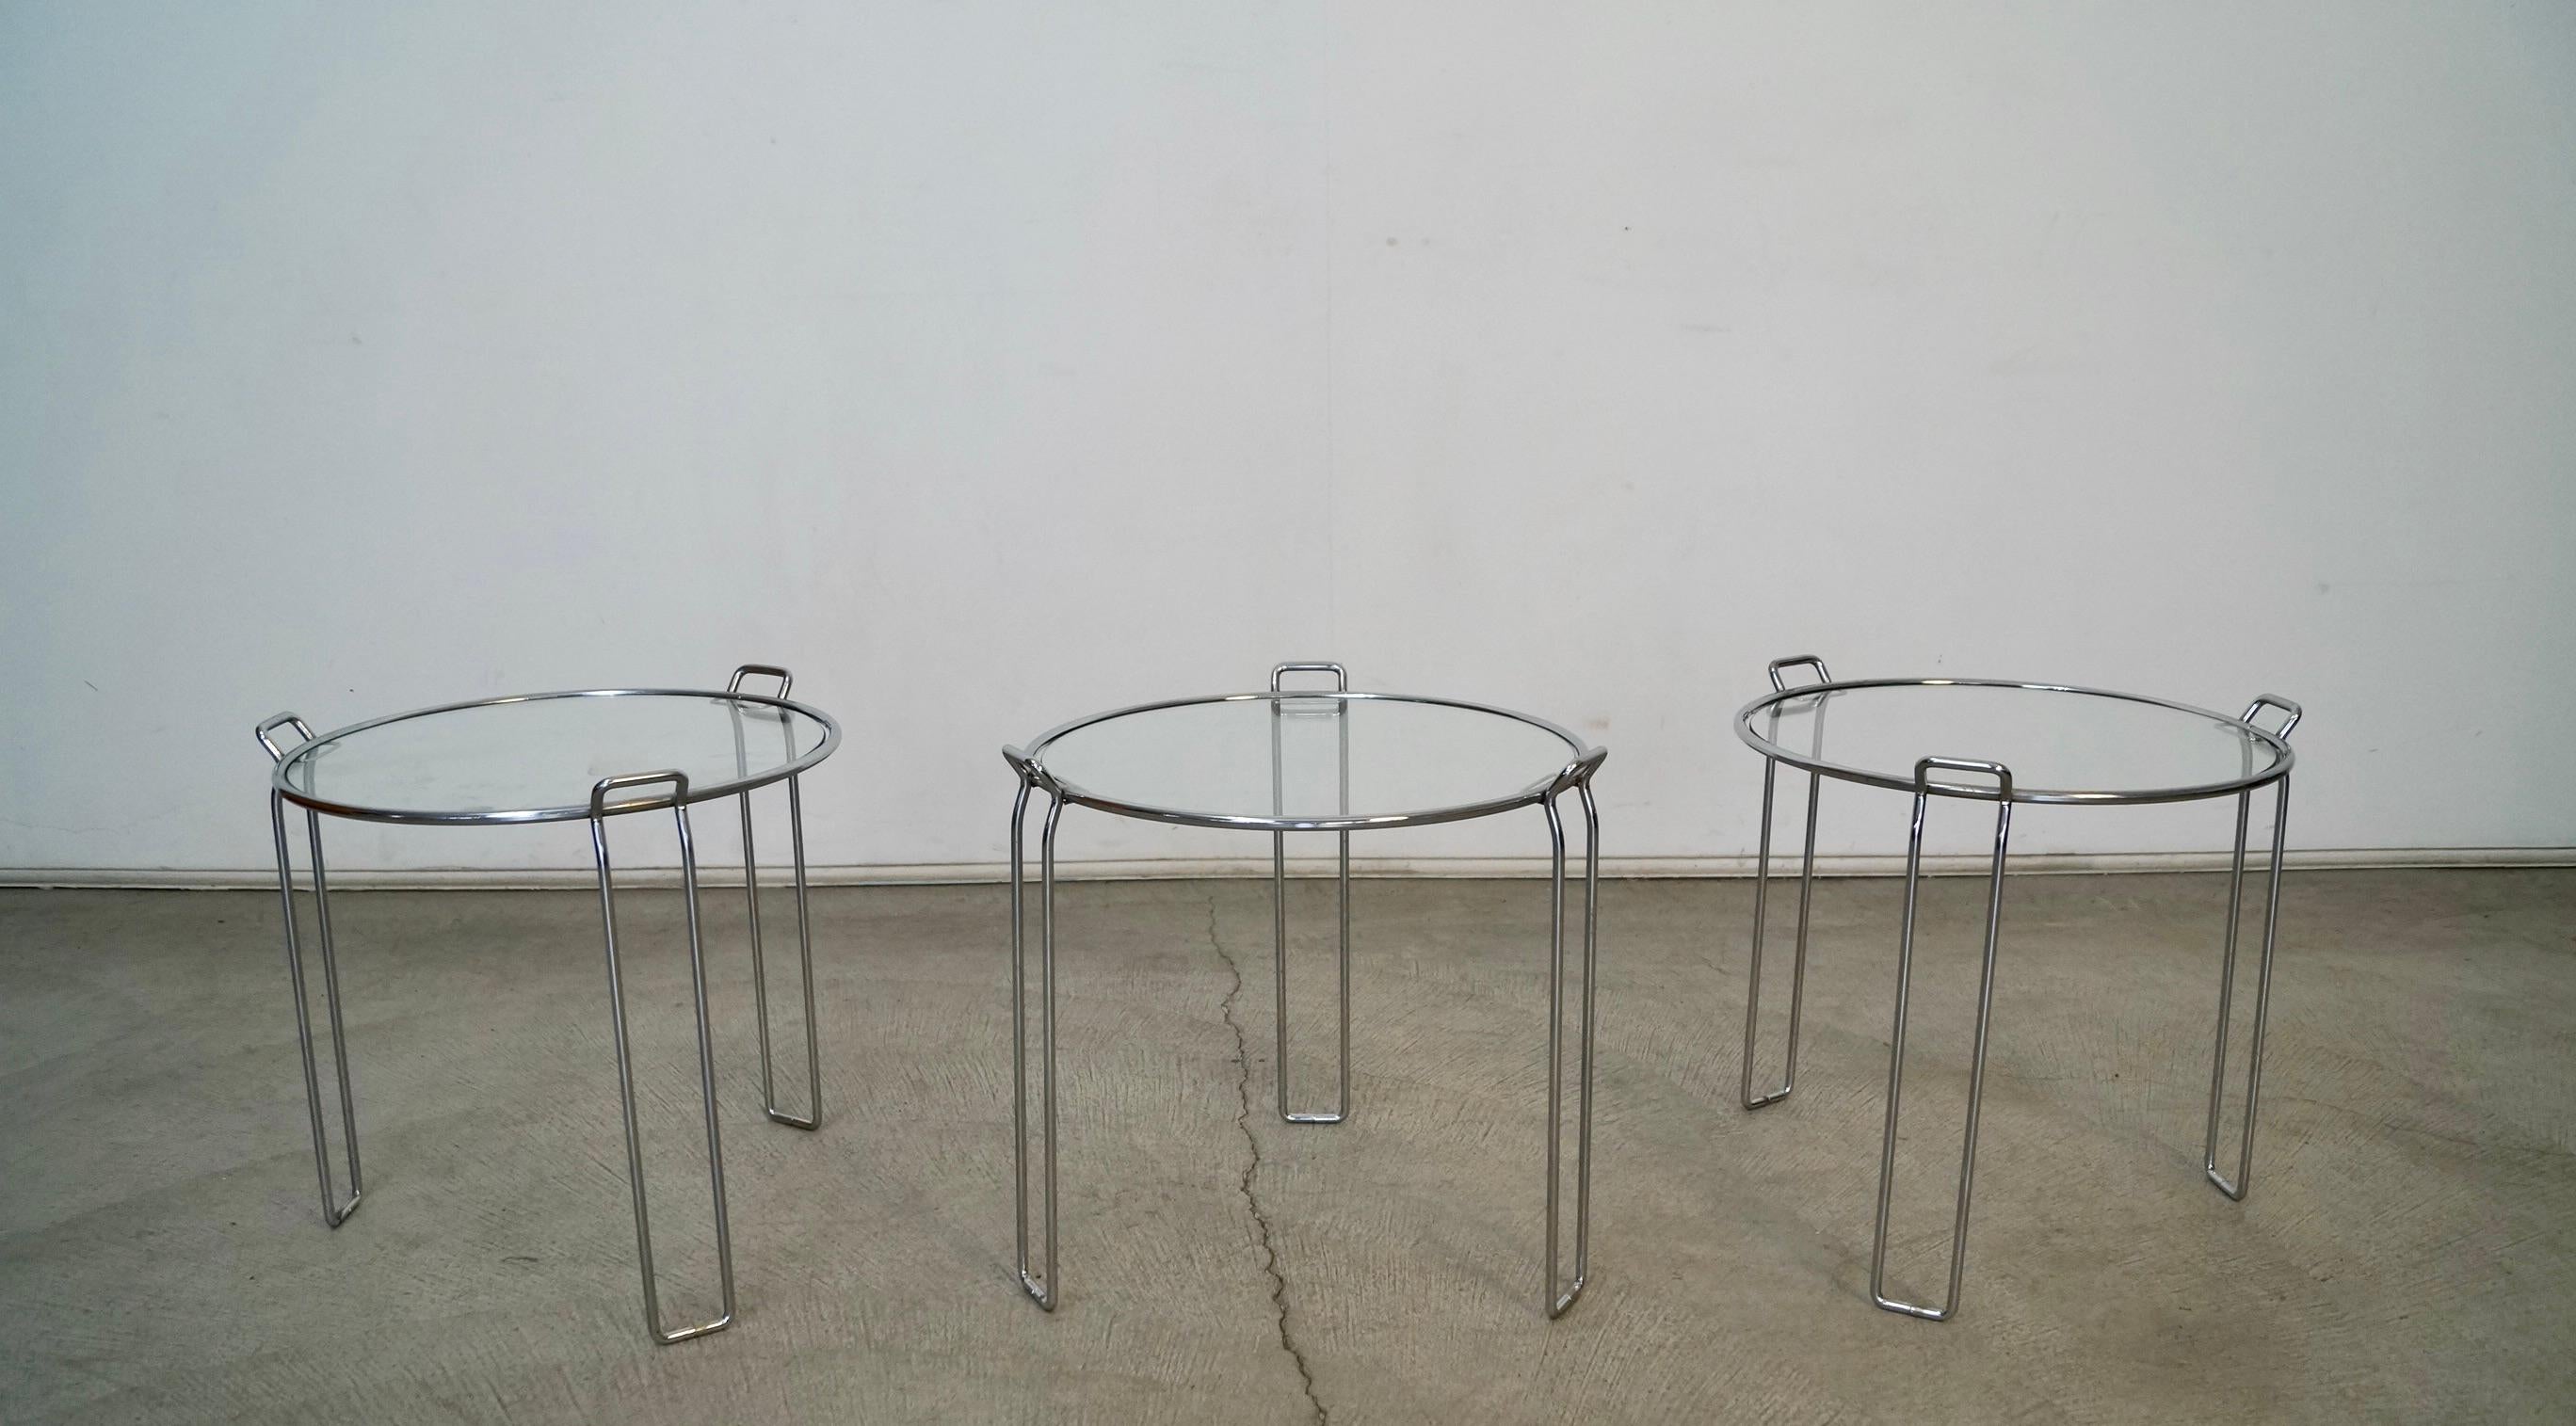 Vintage original Midcentury Modern nesting tables for sale. Set of 3 in chrome, and manufactured in the 1970's by Saporiti. These were made in Italy, and have a beautiful chrome frame with a glass inset. They are stackable, and beautiful end tables